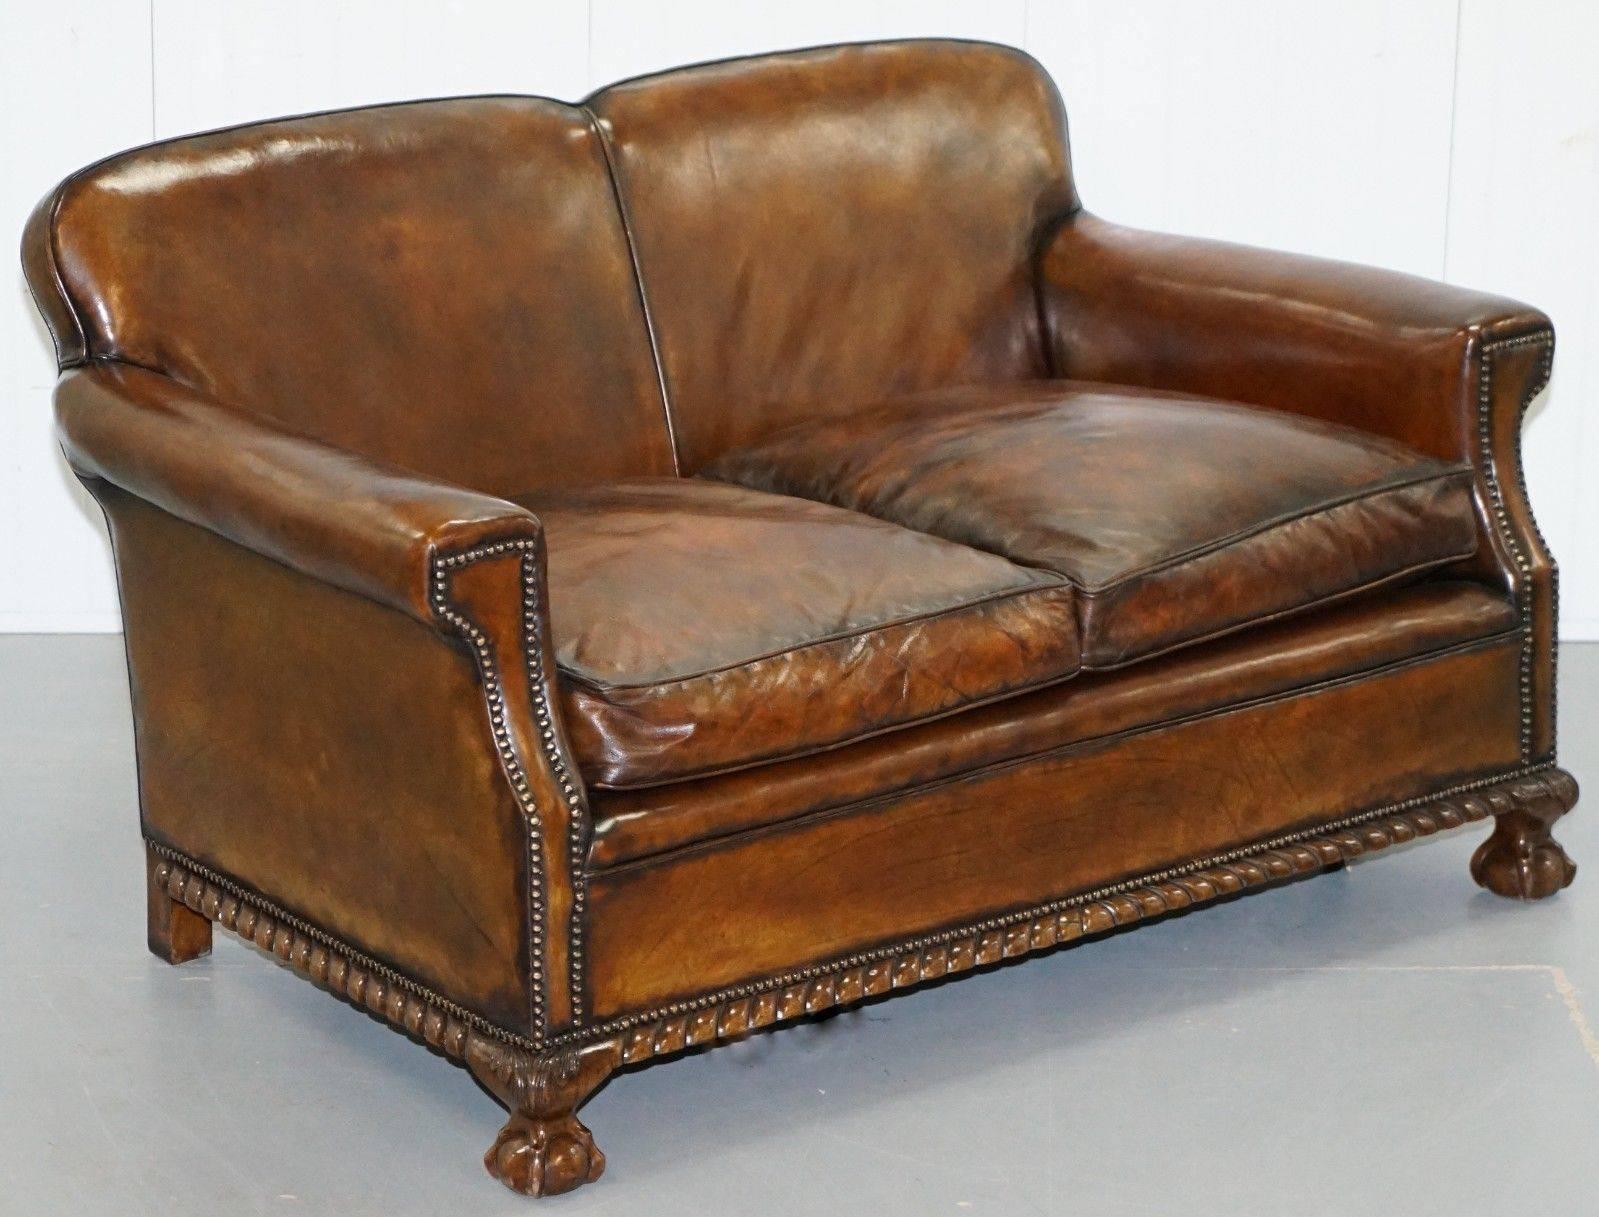 We are delighted to offer for sale this stunning original Victorian fully restored whisky brown leather sofa with coil sprung base feather filled cushions and claw and ball feet

I have included above a picture of the matching armchairs, they are